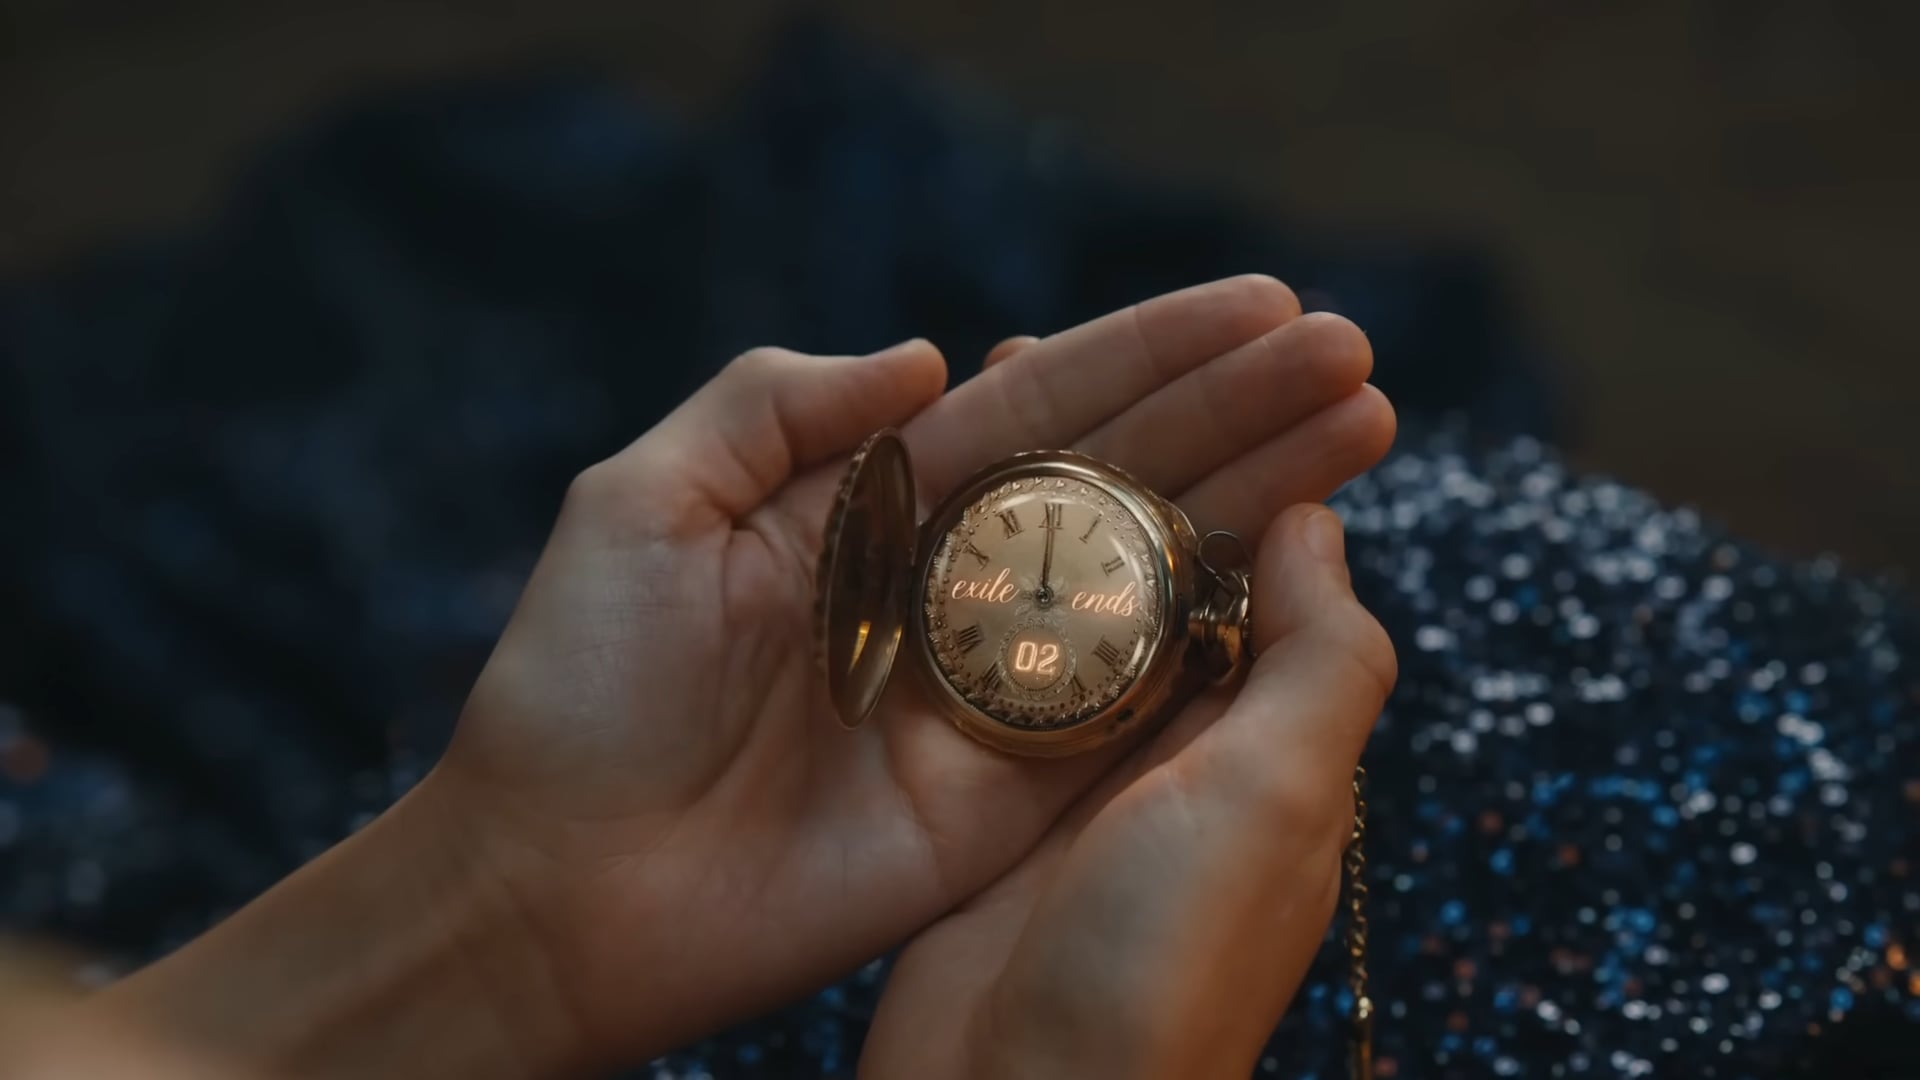 Taylor's pocket watch in the Bejeweled video